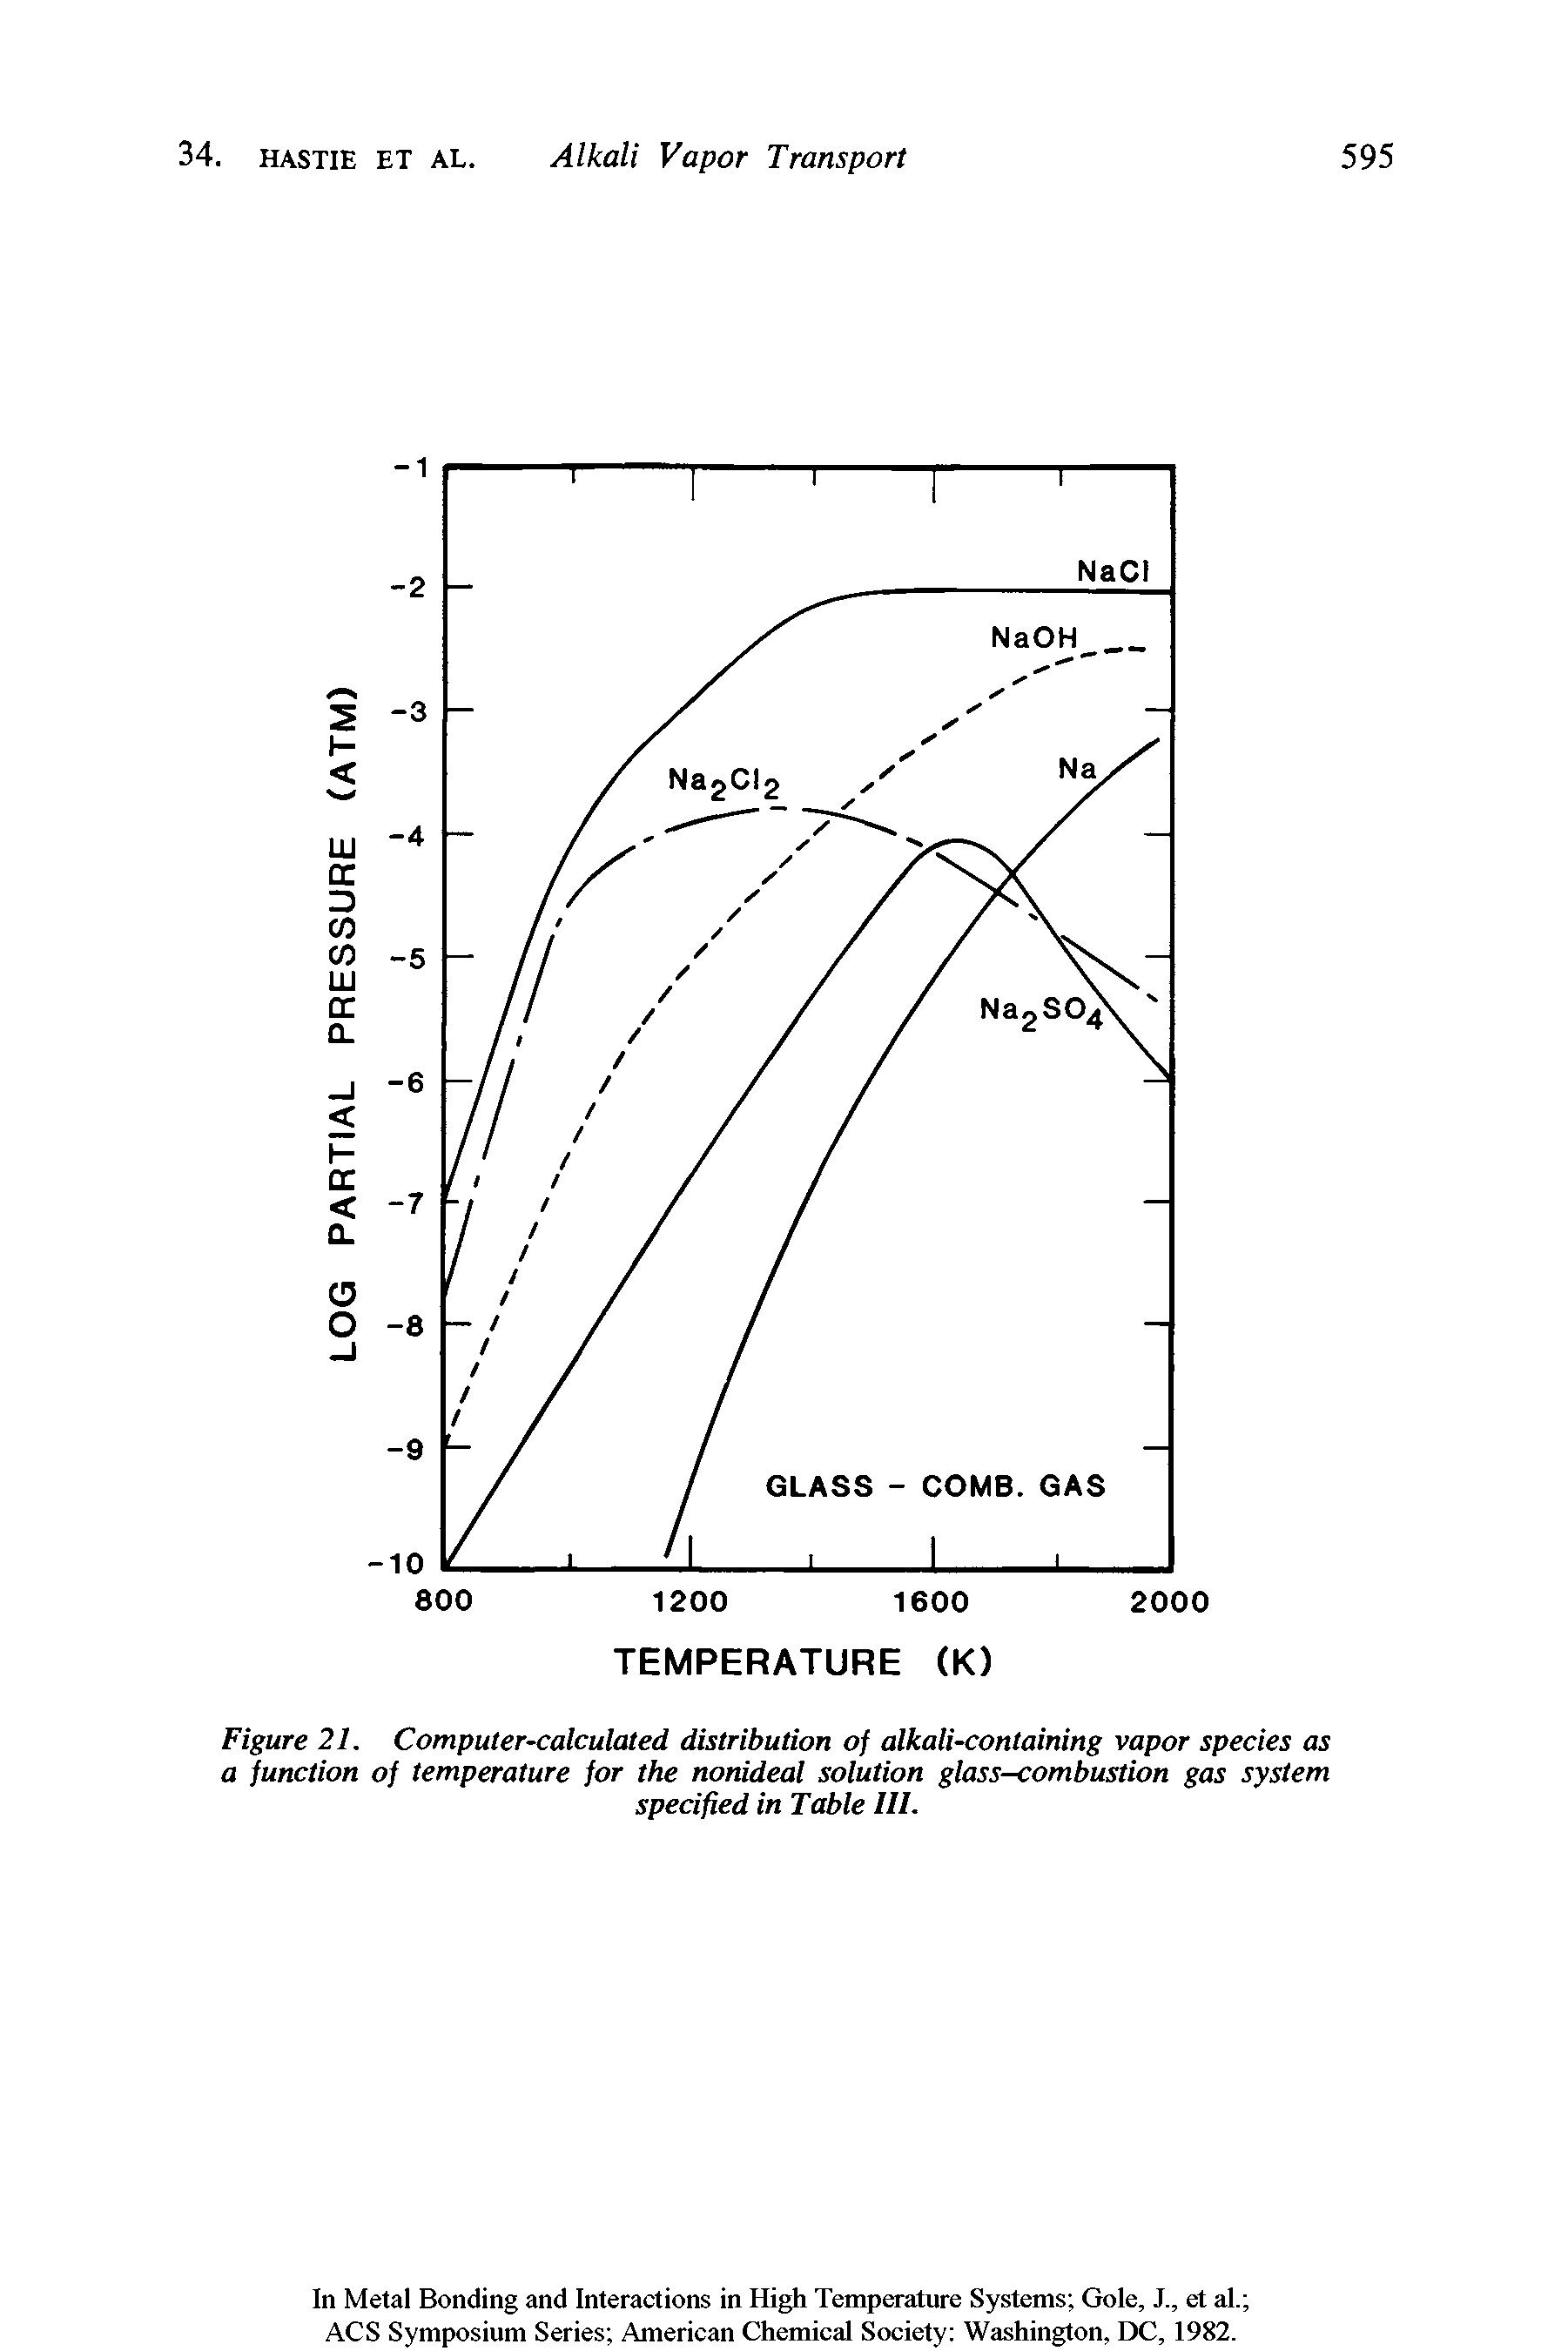 Figure 21. Computer-calculated distribution of alkali-containing vapor species as a junction of temperature for the nonideal solution glass-combustion gas system...